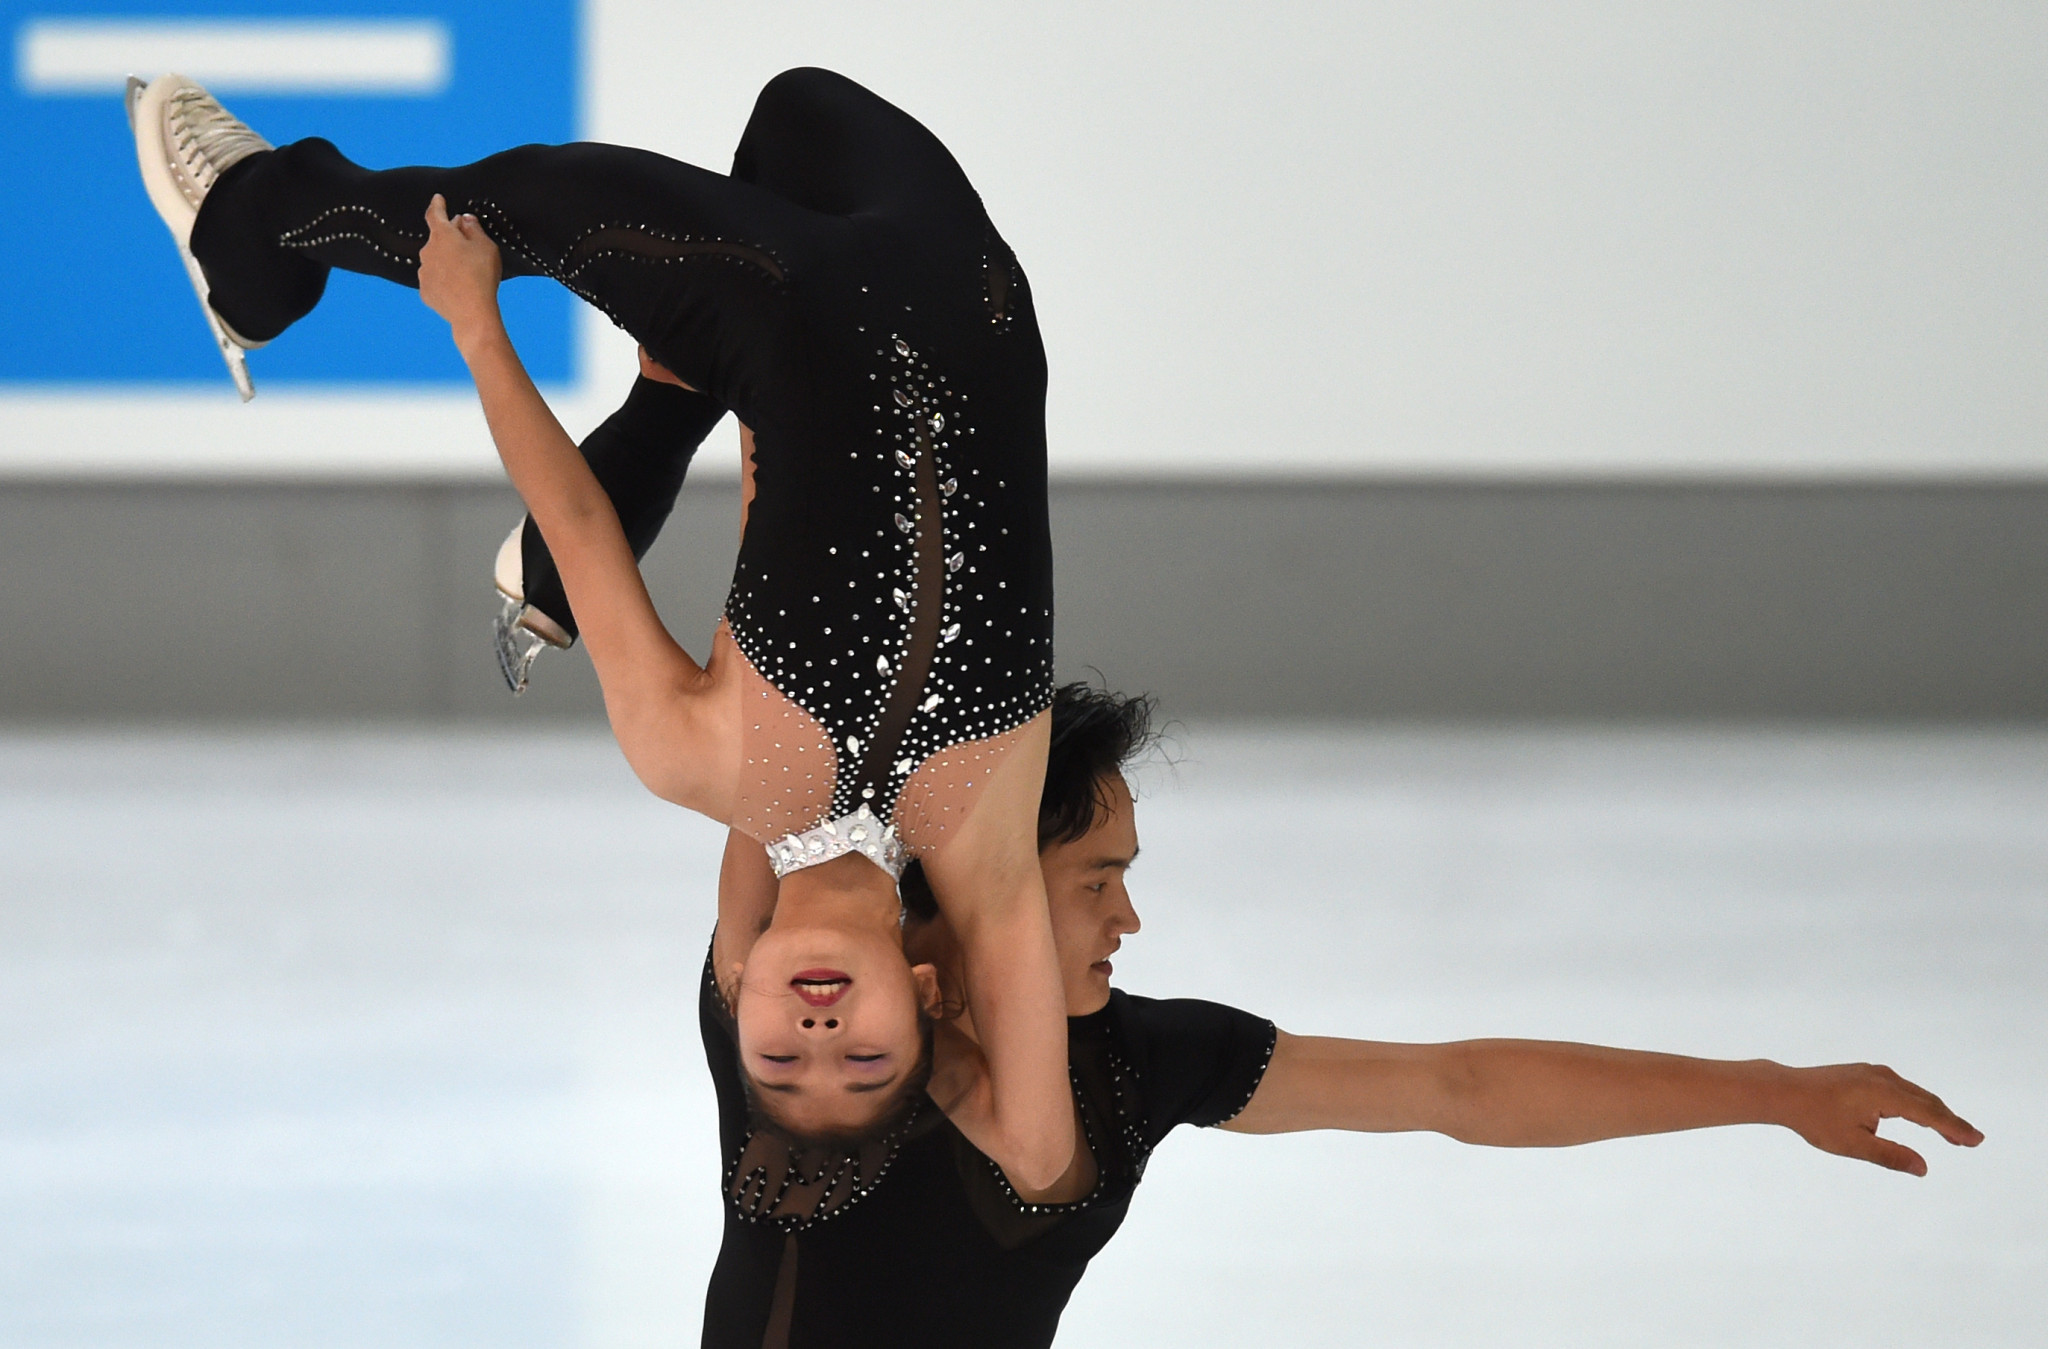 North Korea's Ryom Tae-Ok and Kim Ju-Sik are expected to compete in figure skating at Pyeongchang 2018 ©Getty Images